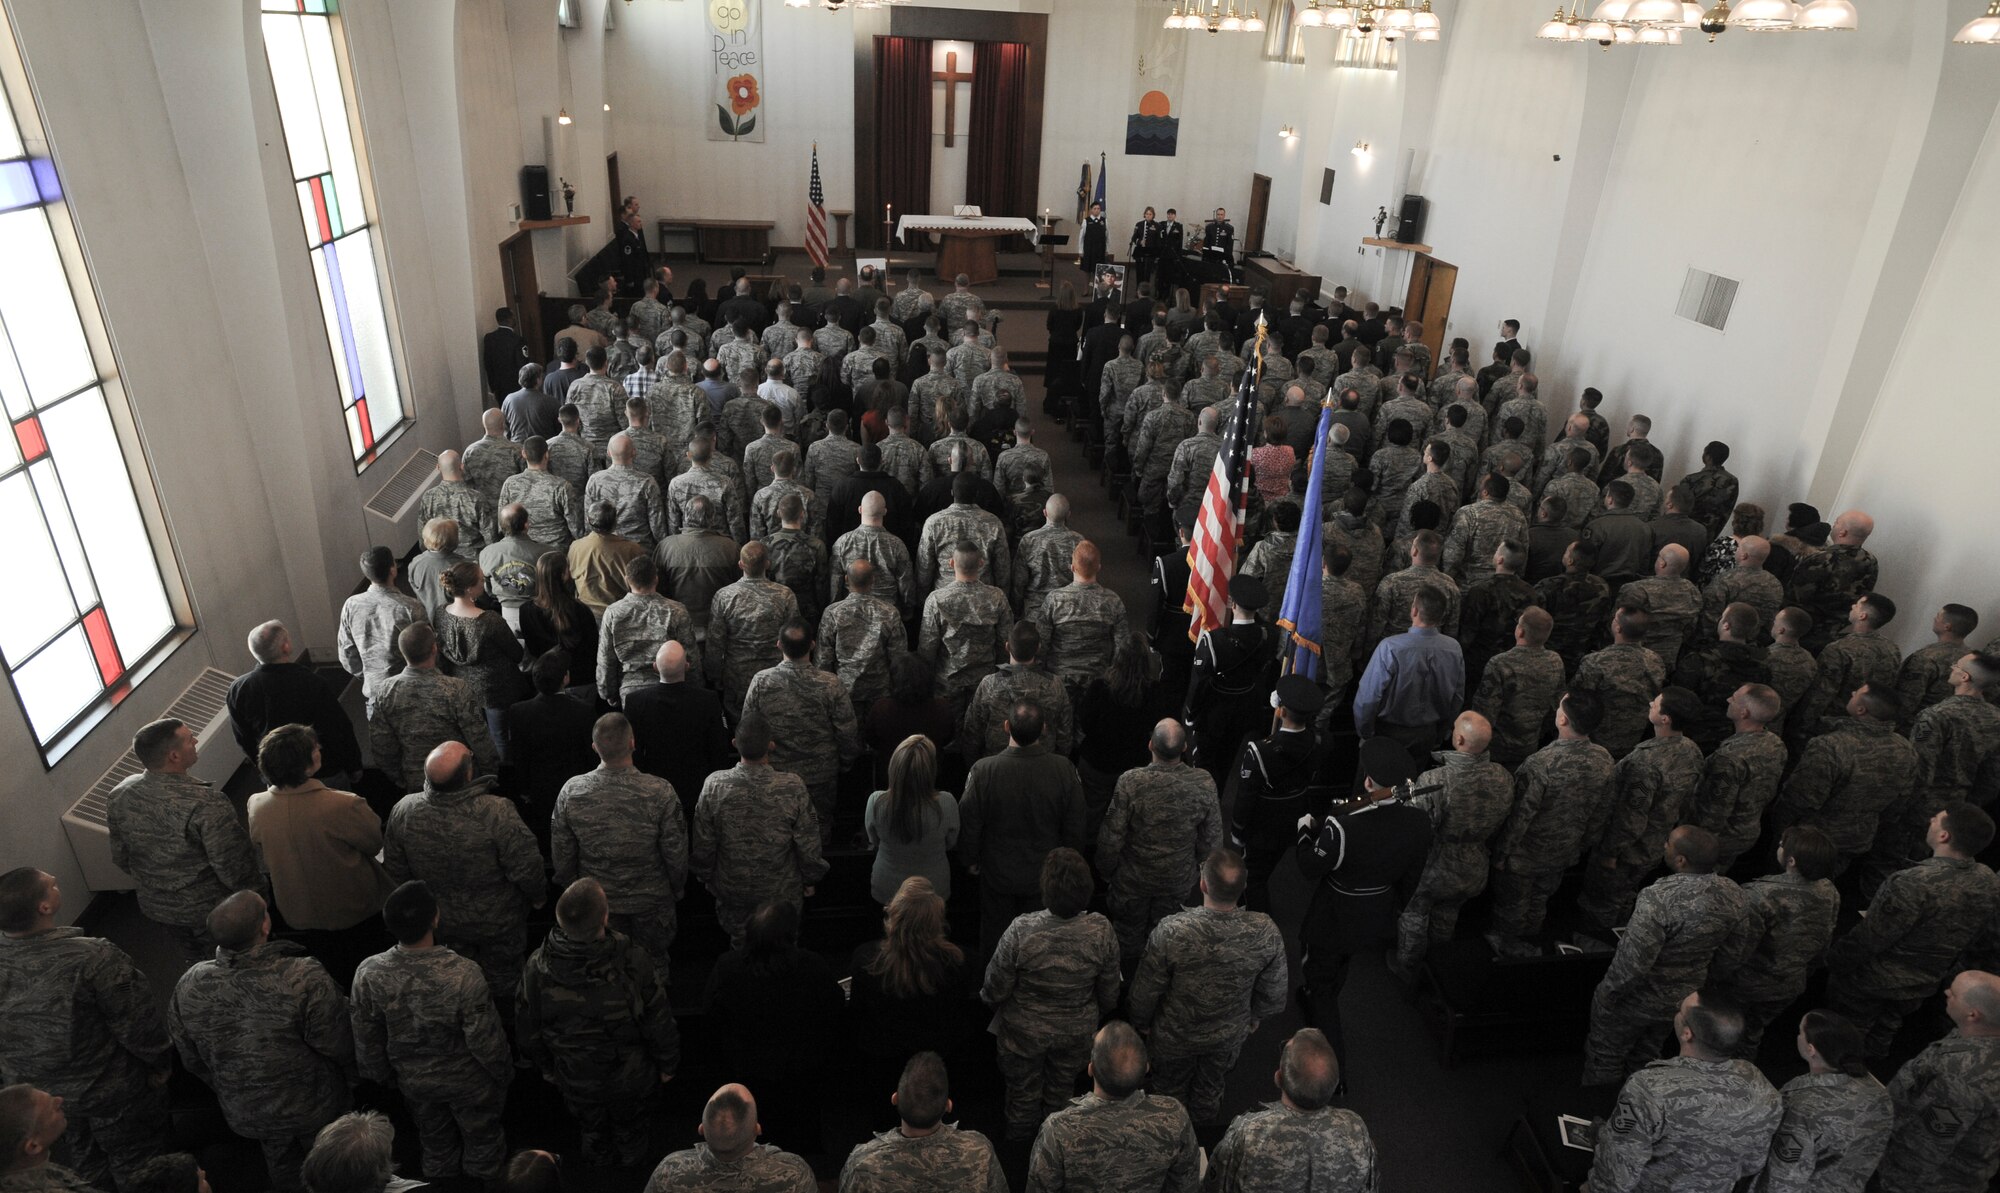 ELMENDORF AIR FORCE BASE, Alaska --  Members of the Elmendorf Honor Guard carry the colors to honor Staff Sgt. Timothy Bowles, 3rd Logistics Readiness Squadron, at a memorial service here March 19. Bowles was killed in action in Afghanistan March 15, 2009. (U.S. Air Force photo/Senior Airman Matthew Owens)